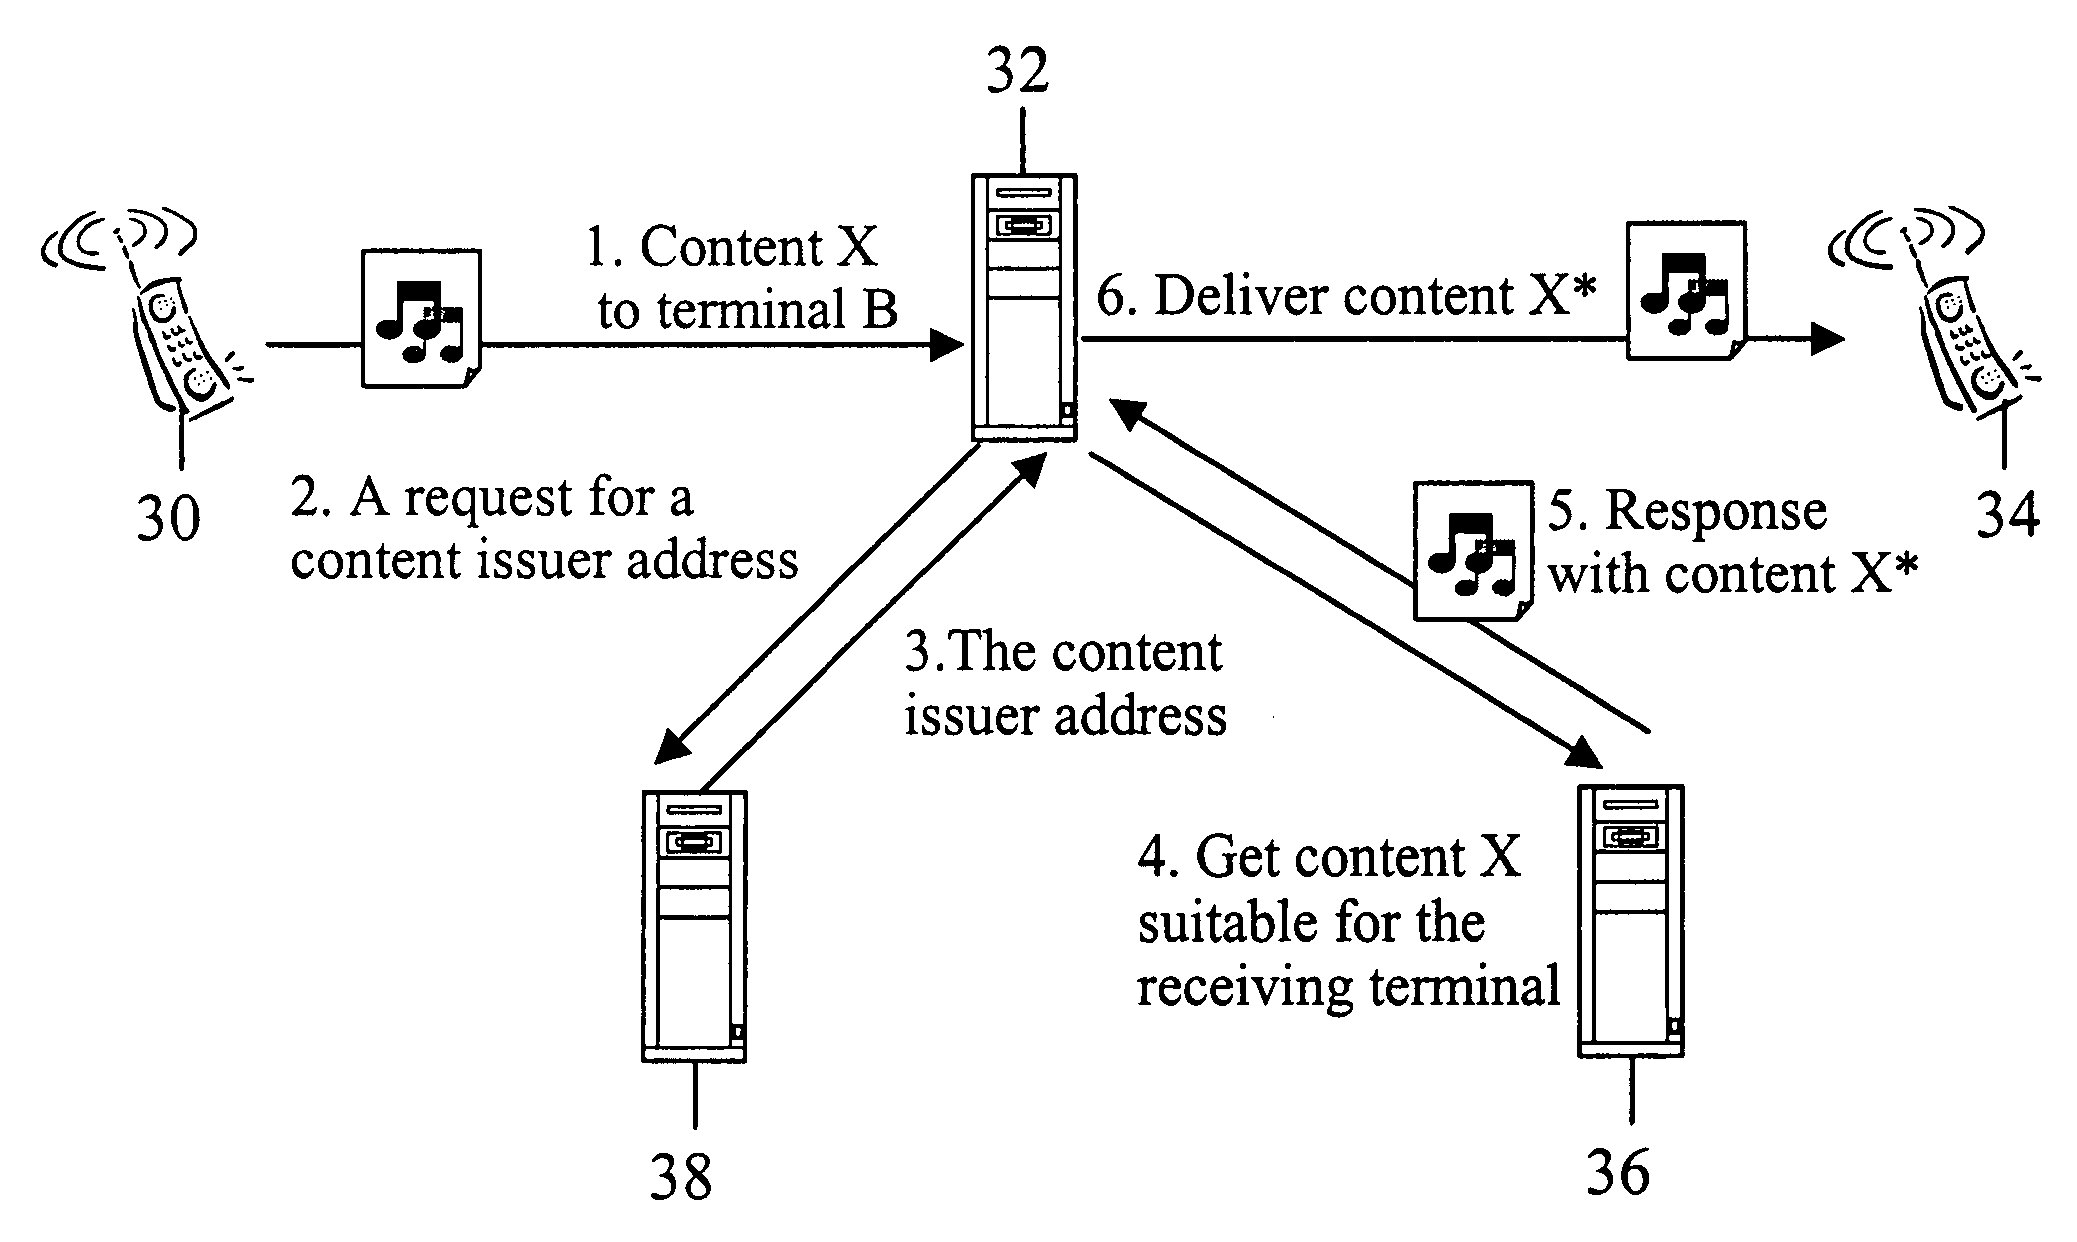 Adapting protected content for a receiving terminal